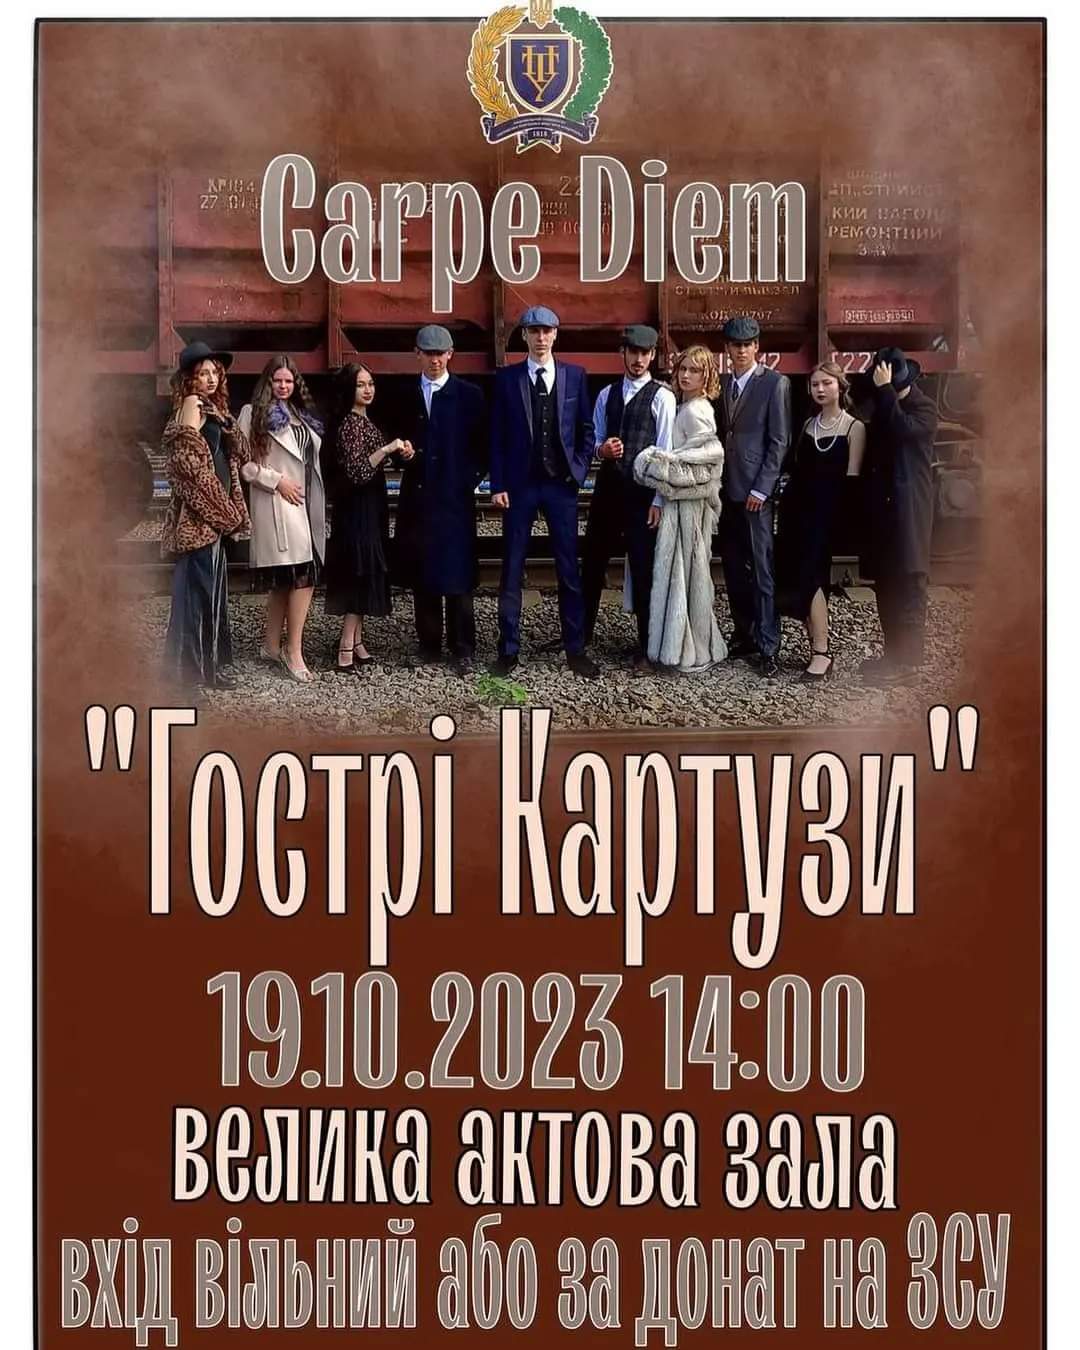 Poltava Polytechnic Theatre invites you to a charity performance based on the gangster series